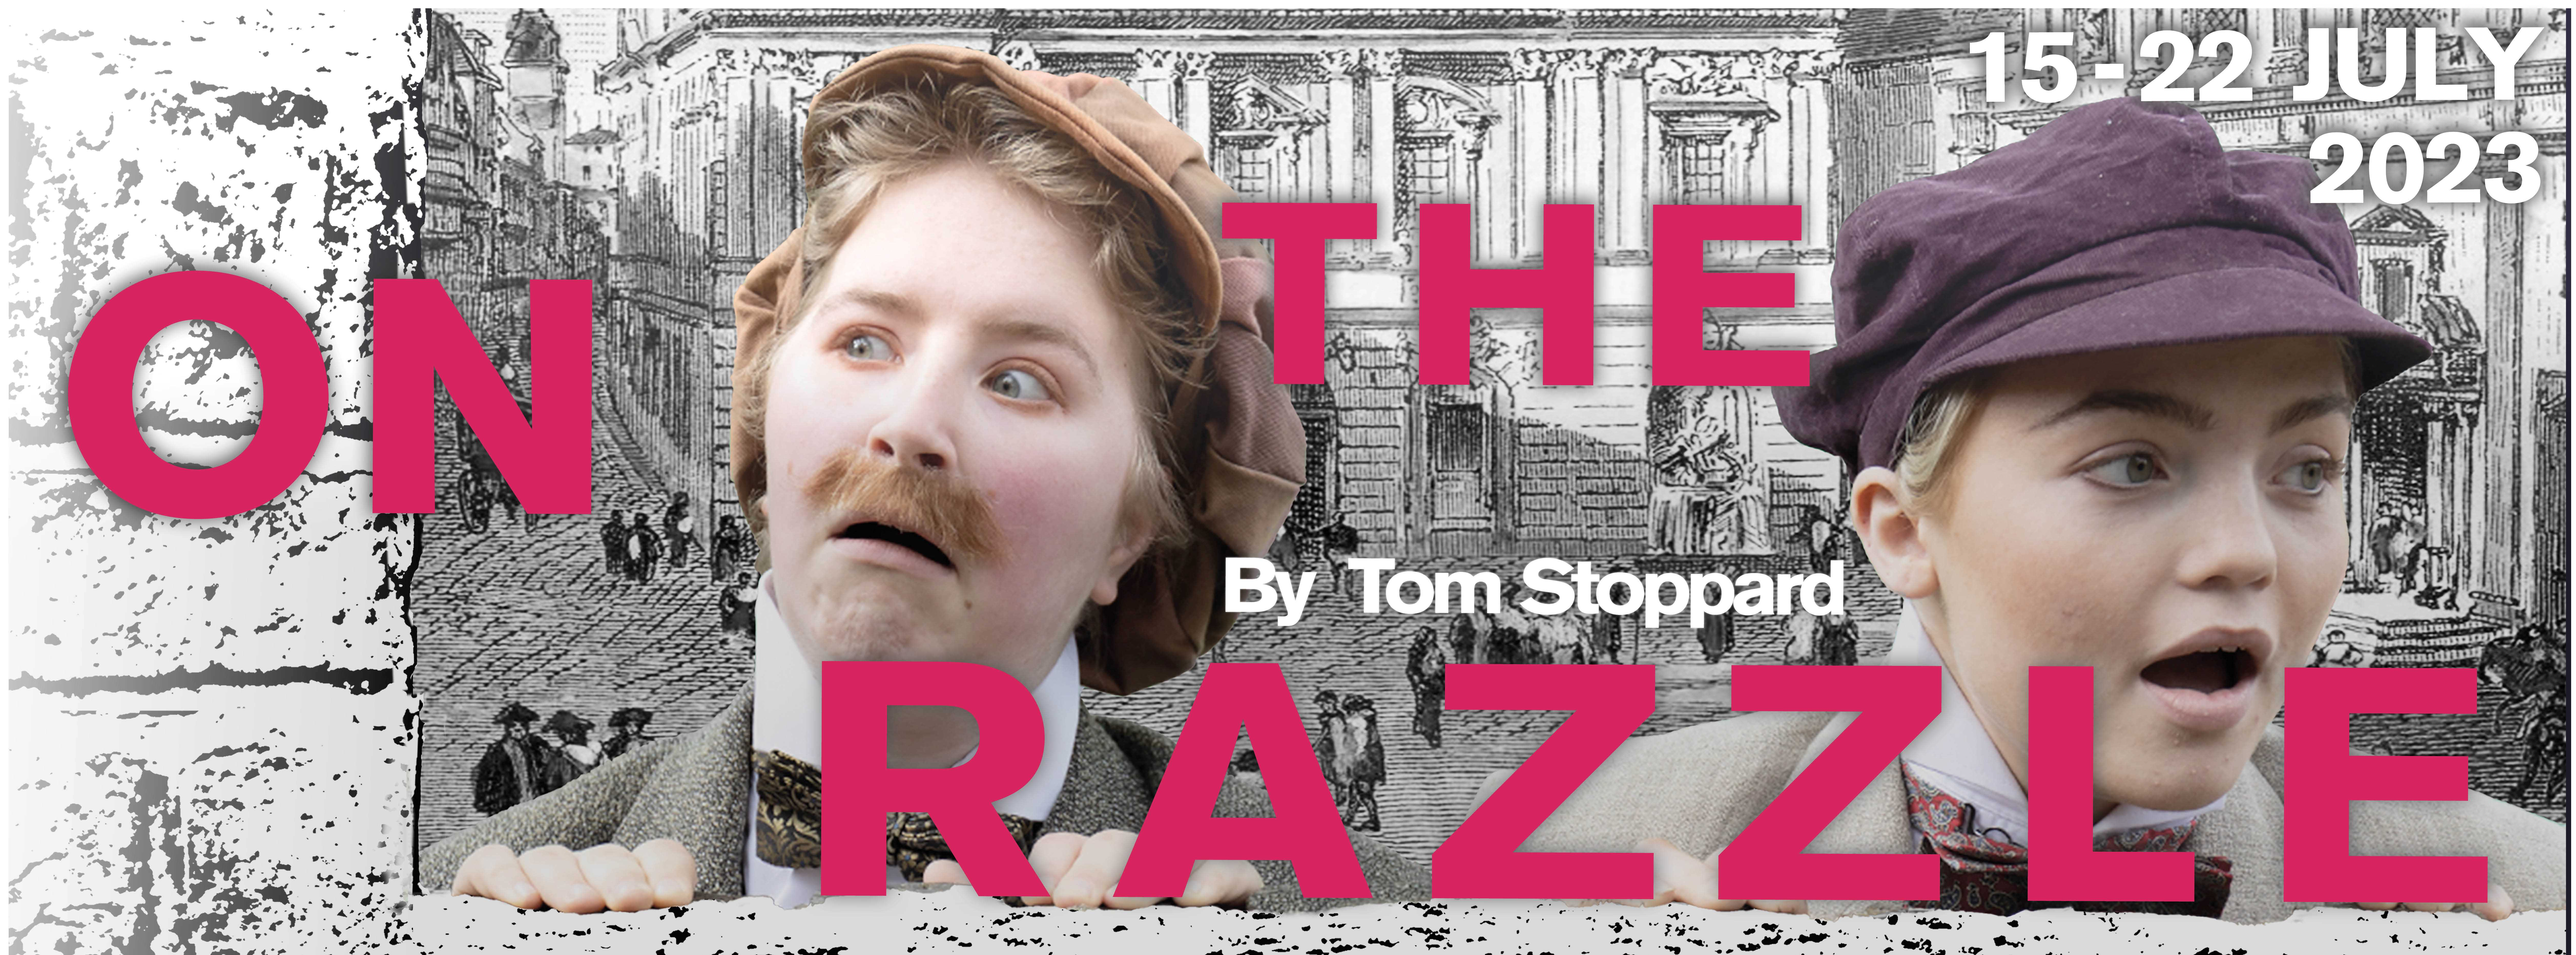 Tom Stoppard's ON THE RAZZLE is Coming to The Questors Theatre in July 